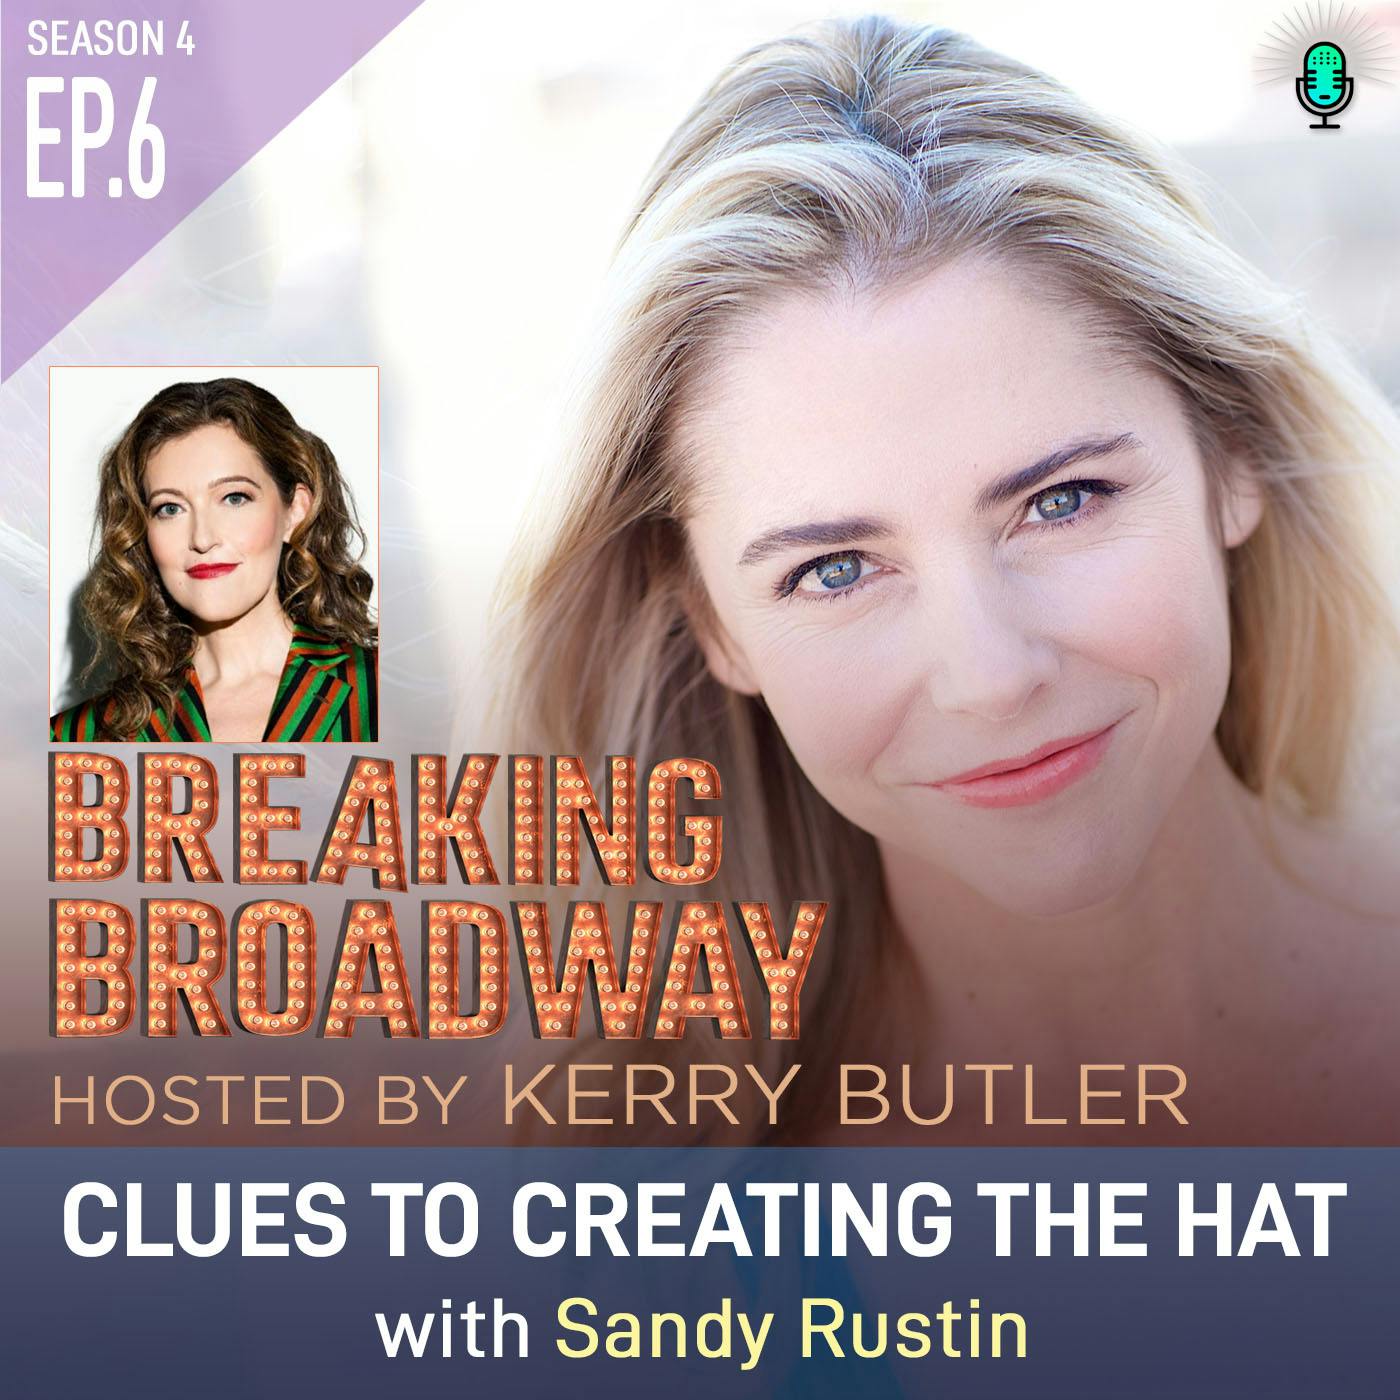 S4 Ep6 Clues to Creating the Hat with Sandy Rustin